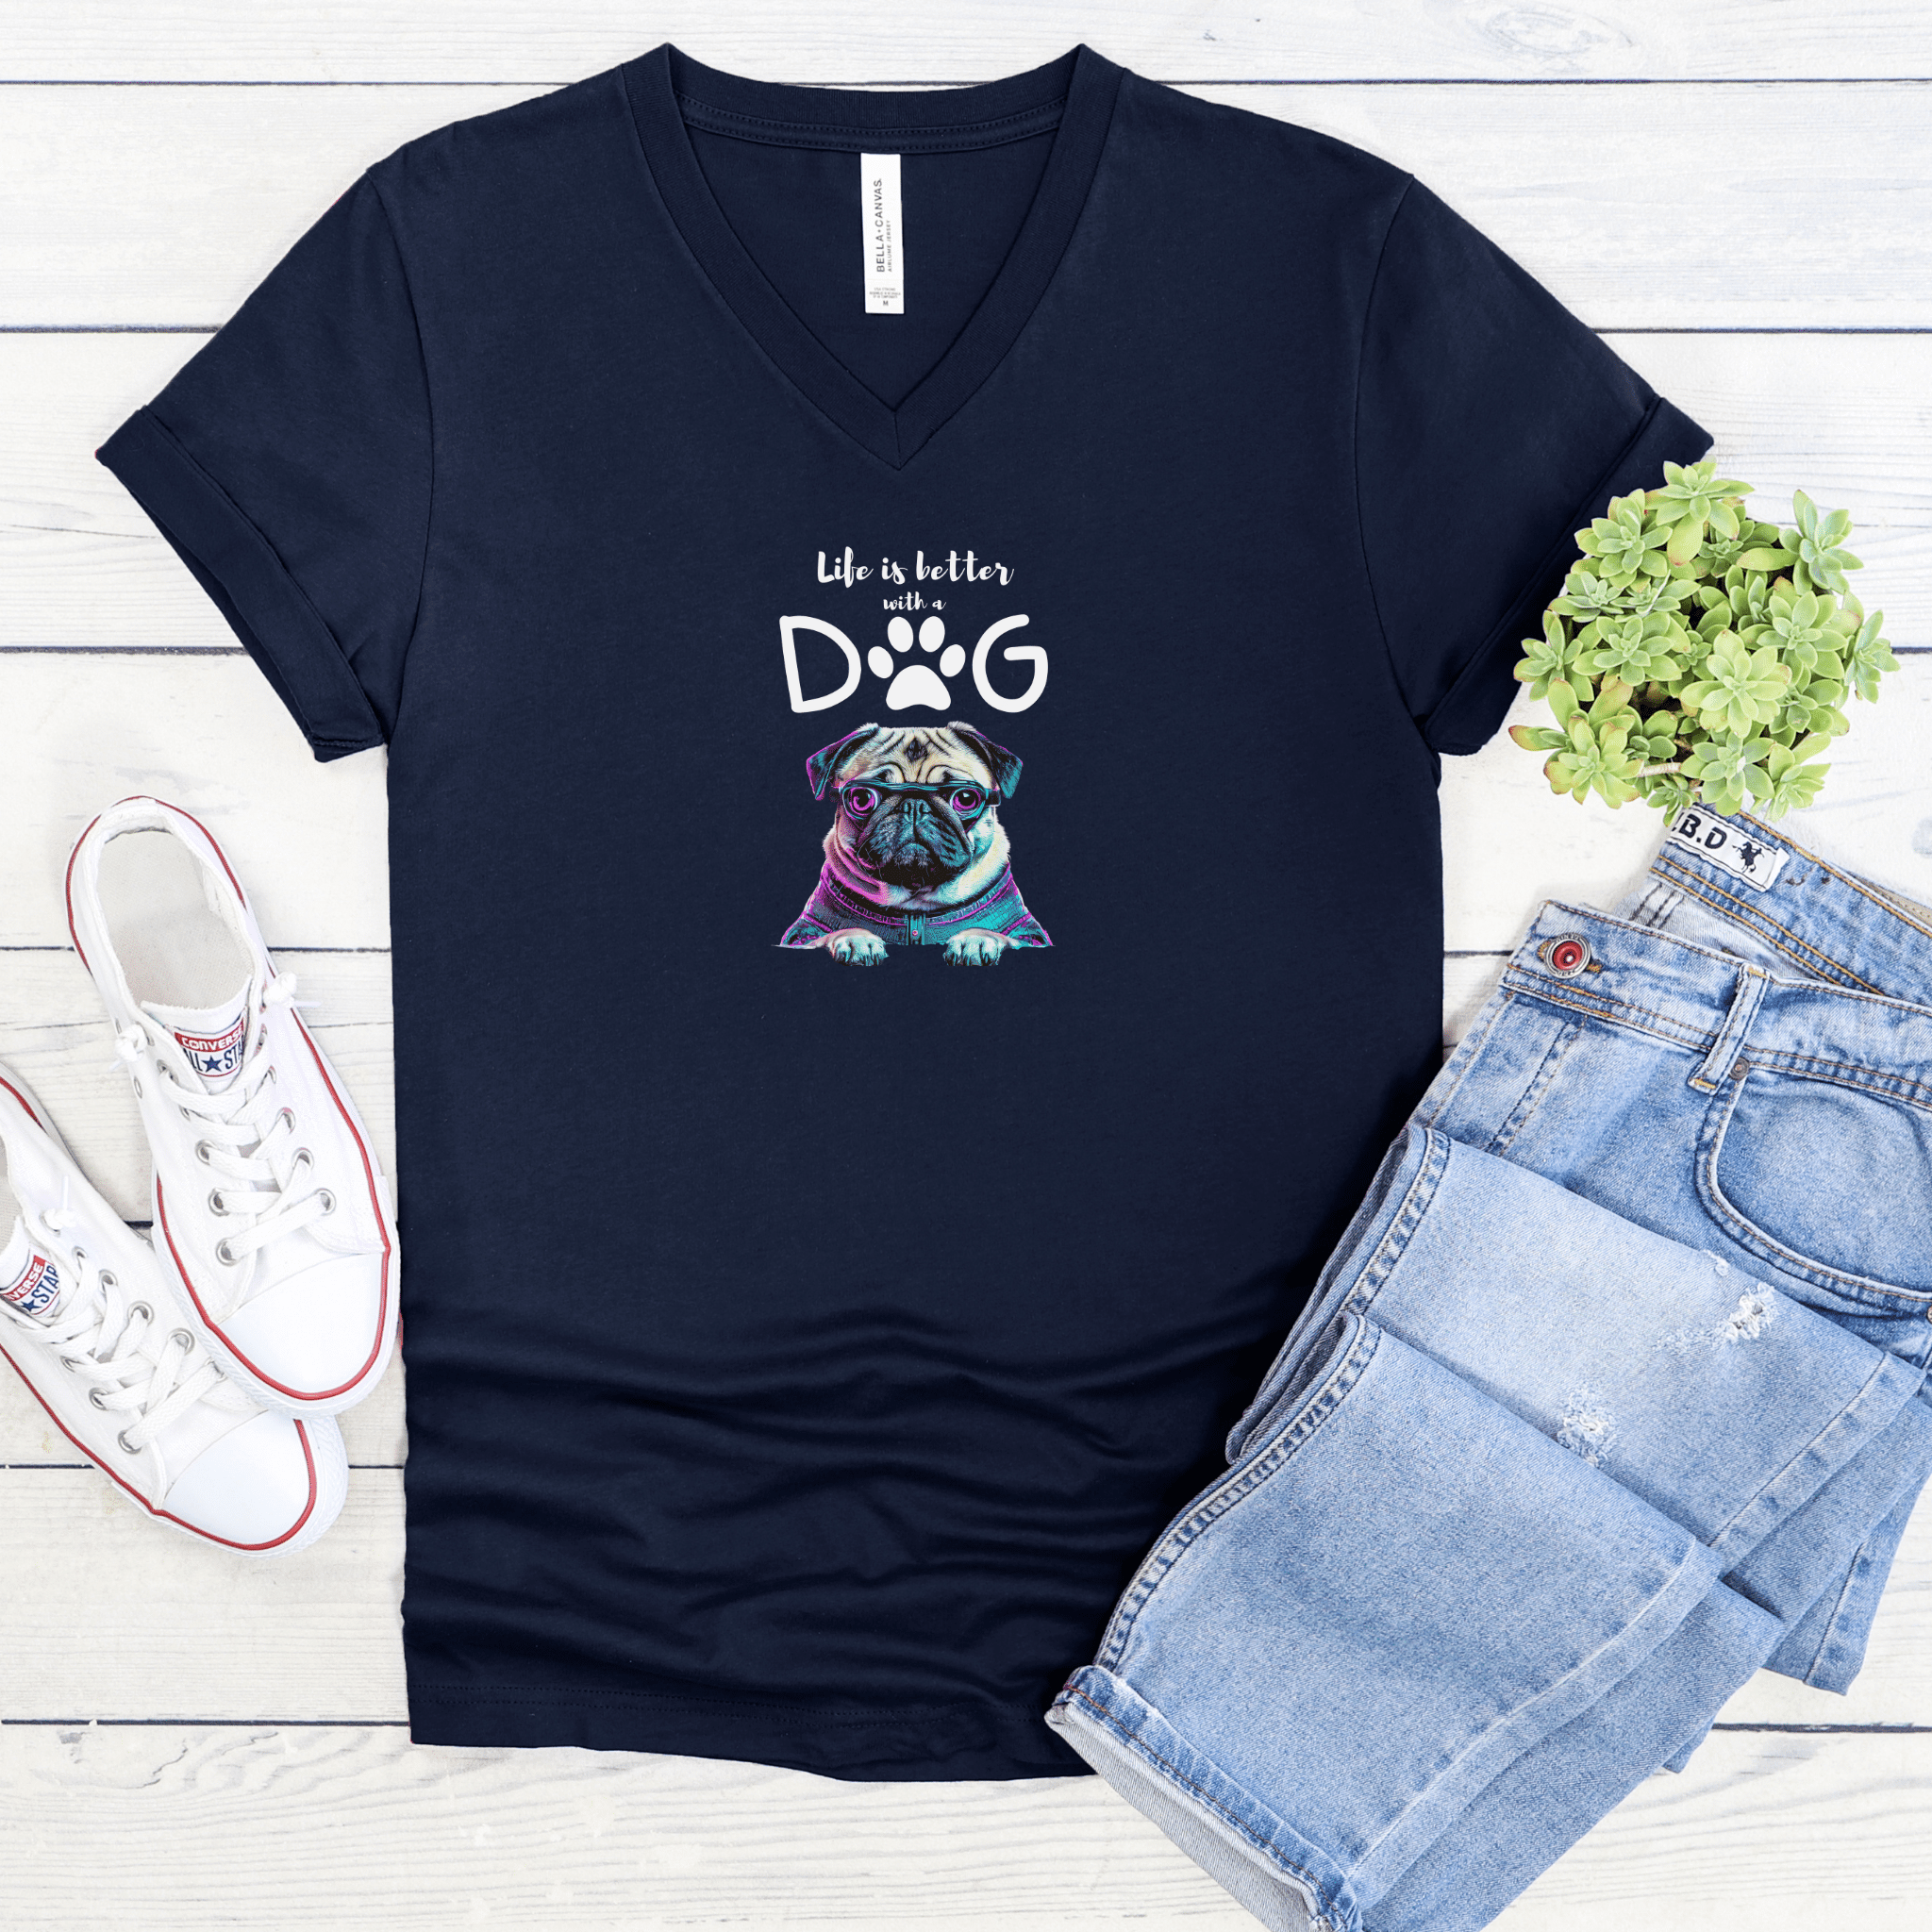 Life is Better with a Dog - Pug - Soulshinecreators - Cotton